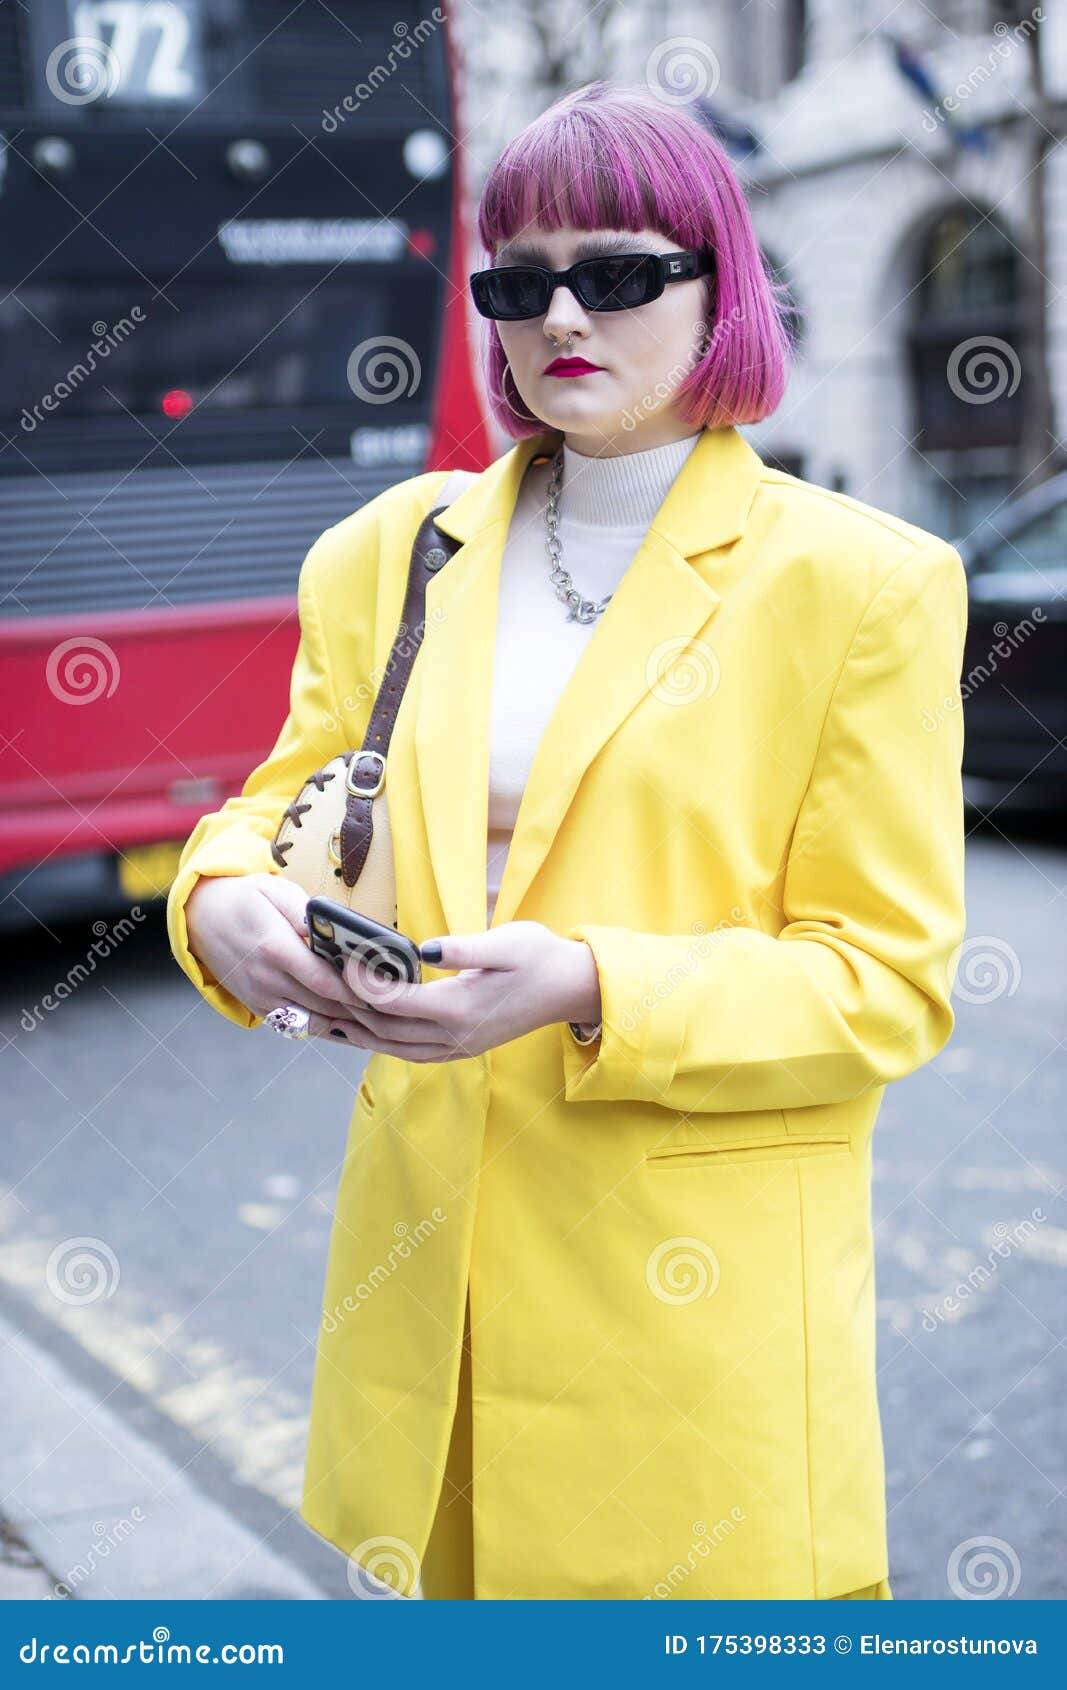 Fashionable People on the Street . Street Style Editorial Stock Photo ...